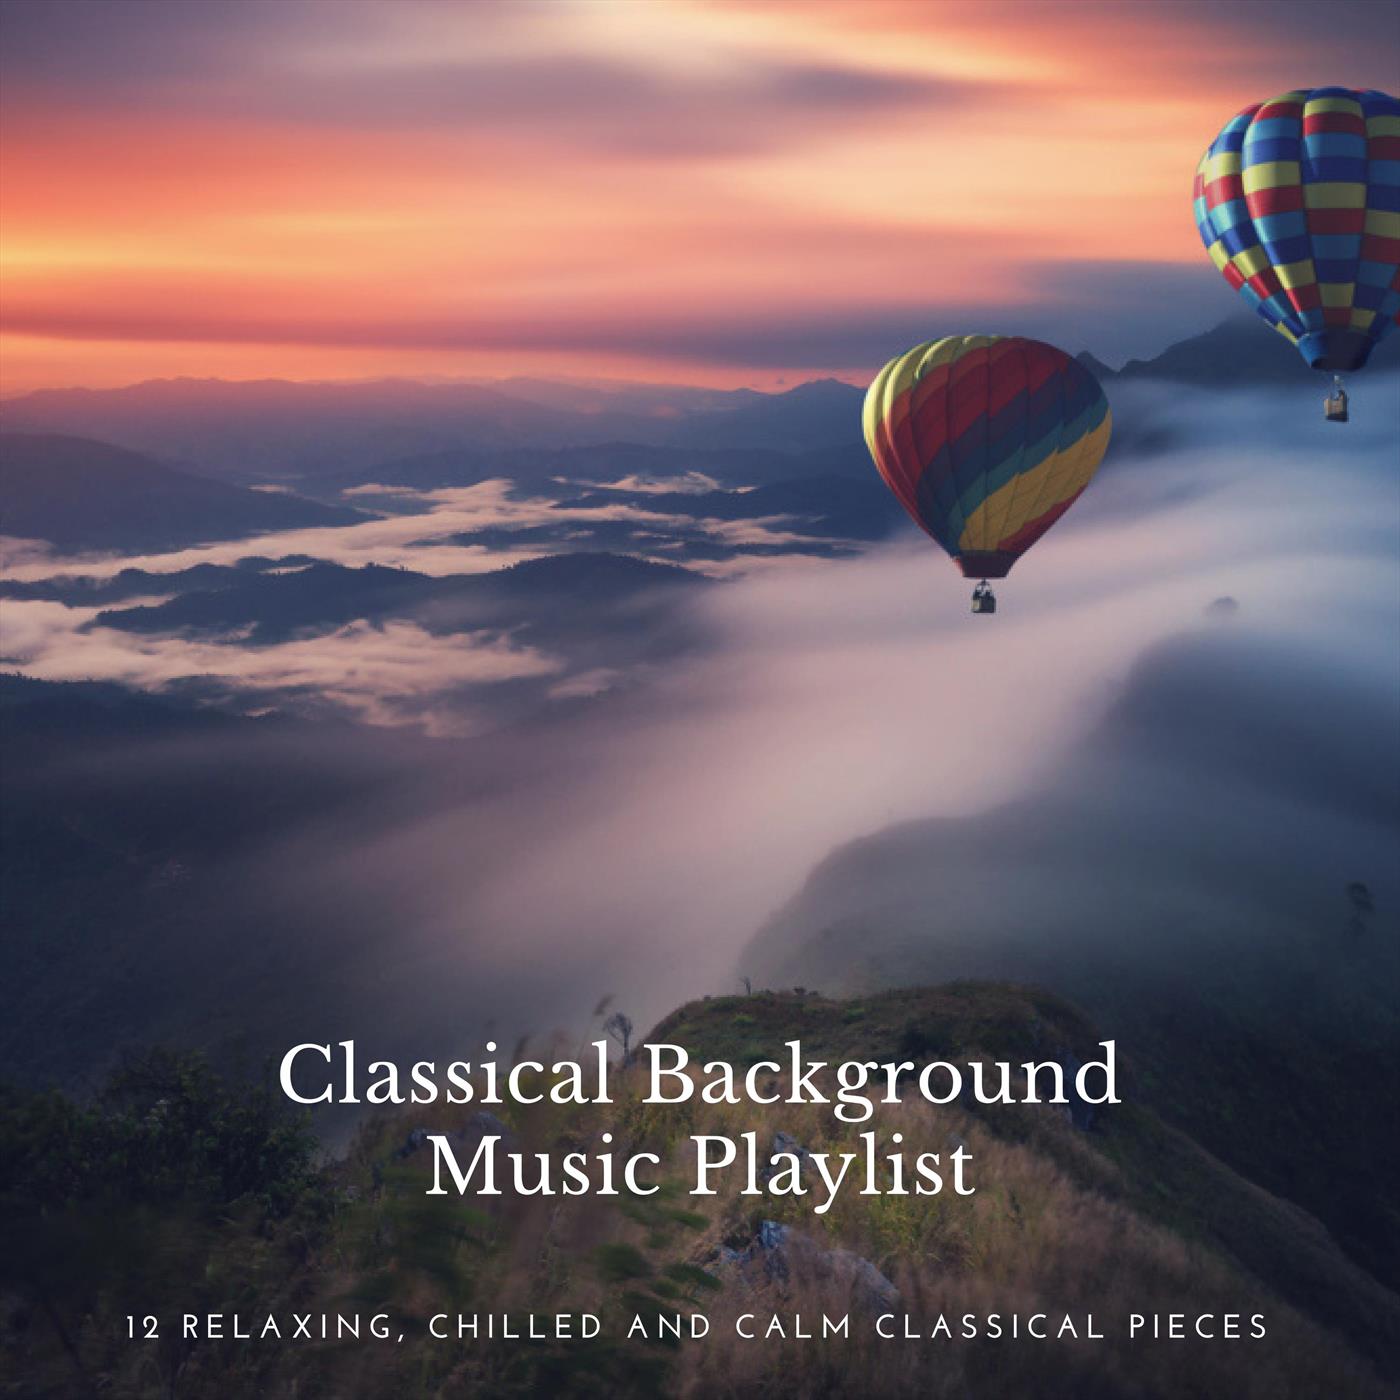 Classical Background Music Playlist: 12 Relaxing, Chilled and Calm Classical Pieces